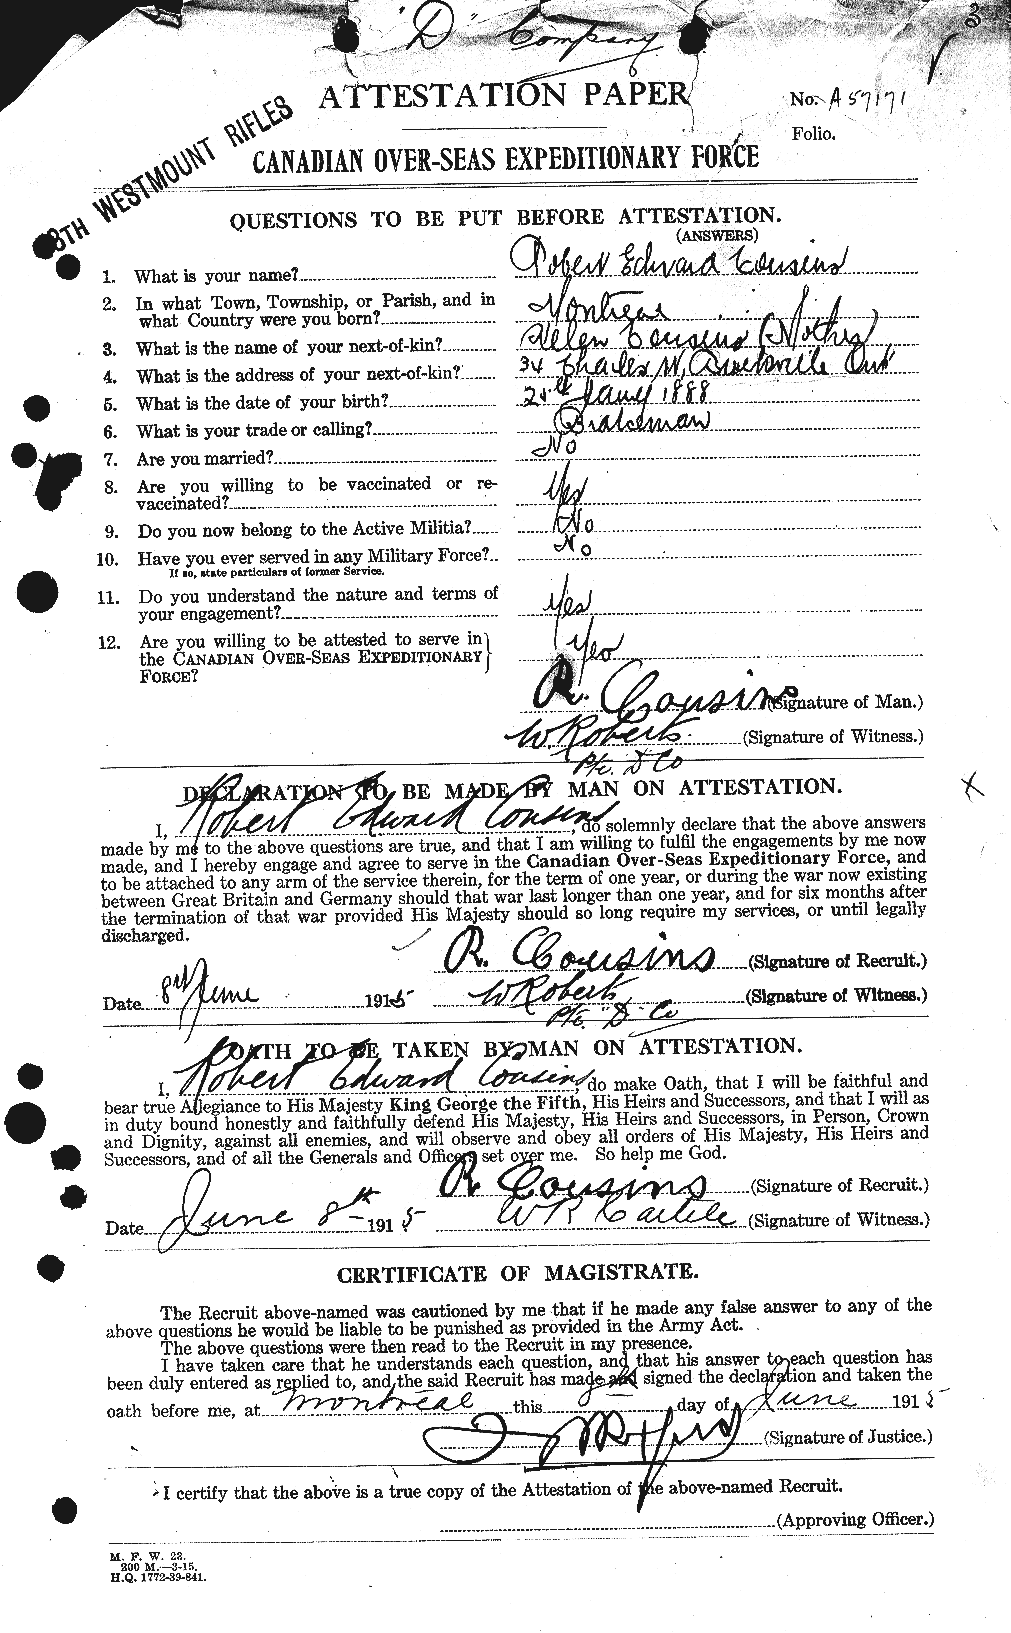 Personnel Records of the First World War - CEF 058202a